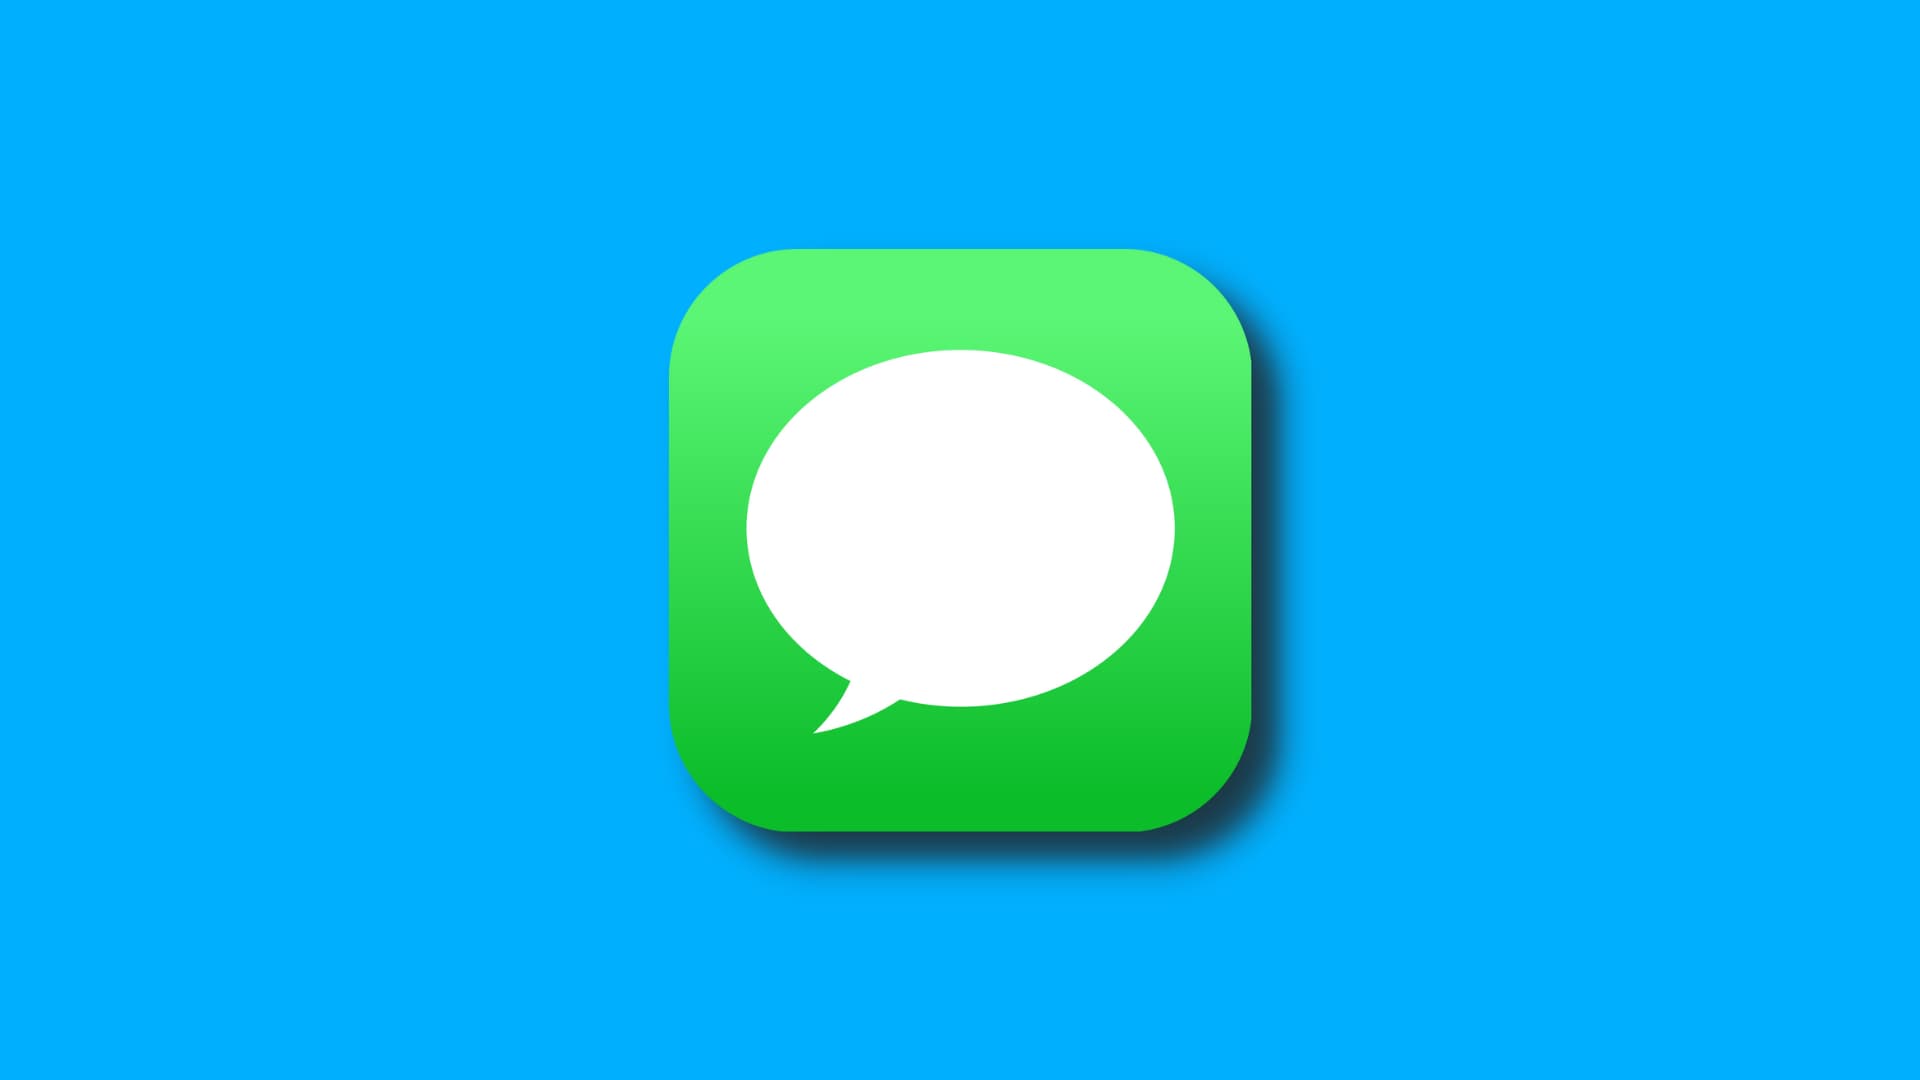 RCS chat bubbles on iPhones will remain green